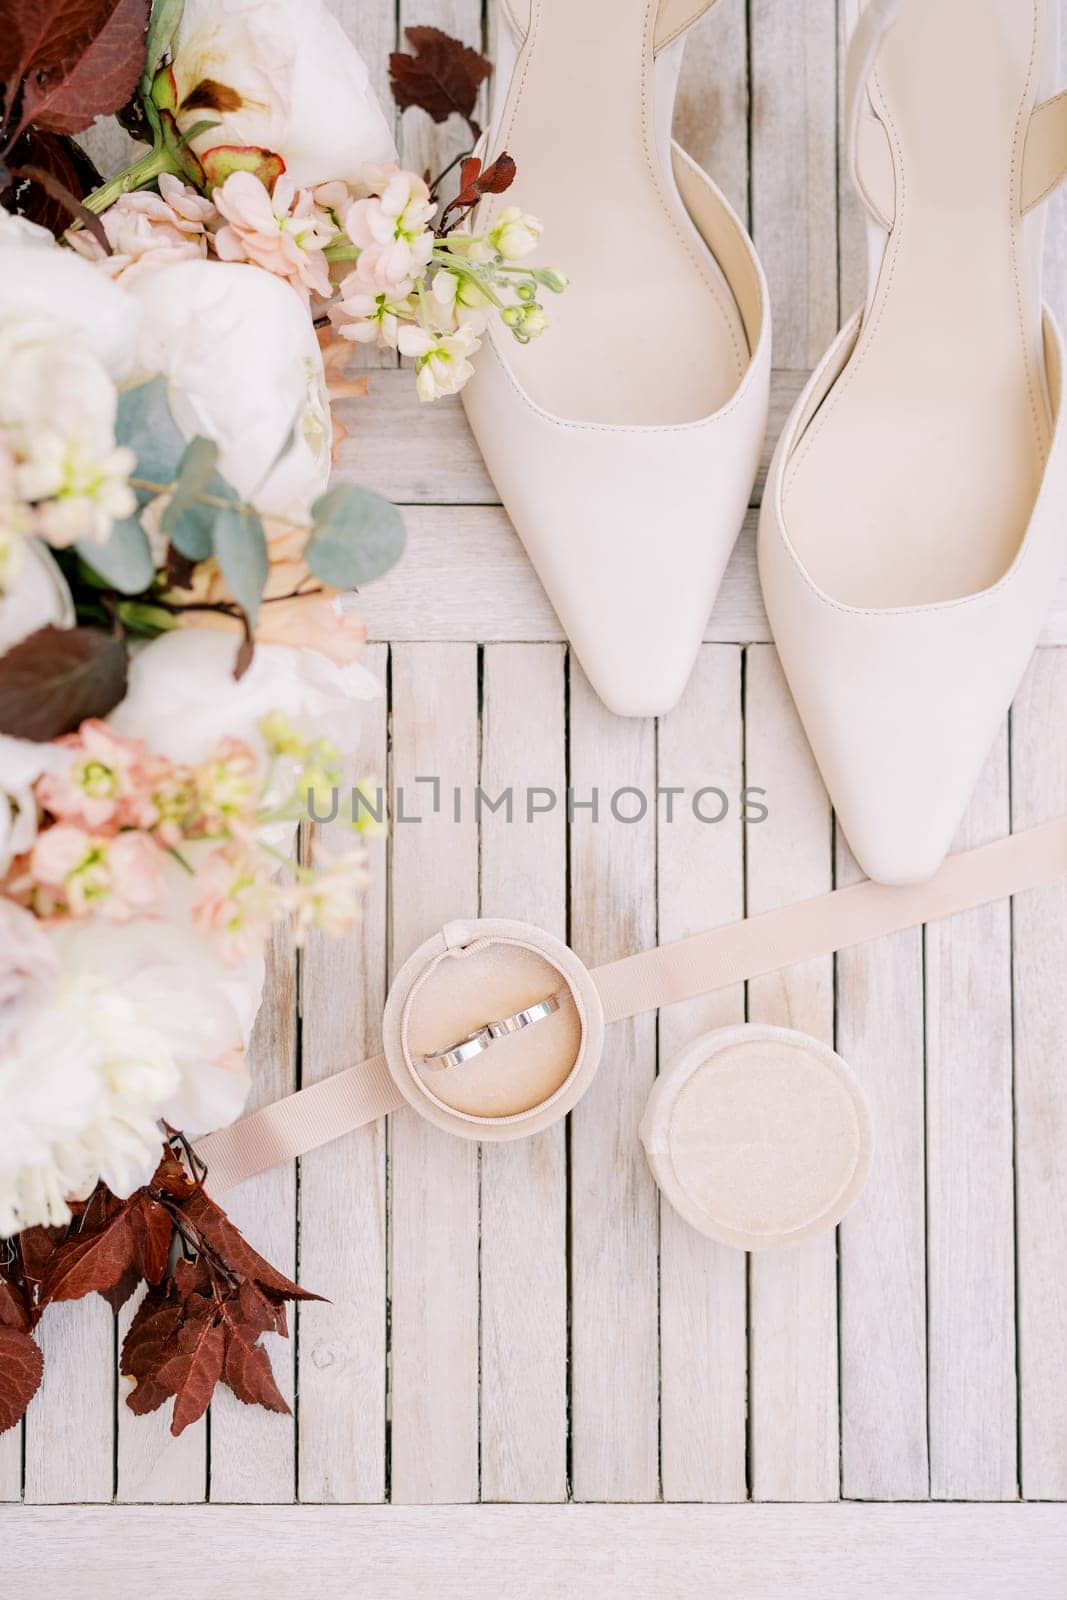 Wedding rings in a box stand on the table near the bride shoes and a bouquet of flowers. Top view. High quality photo